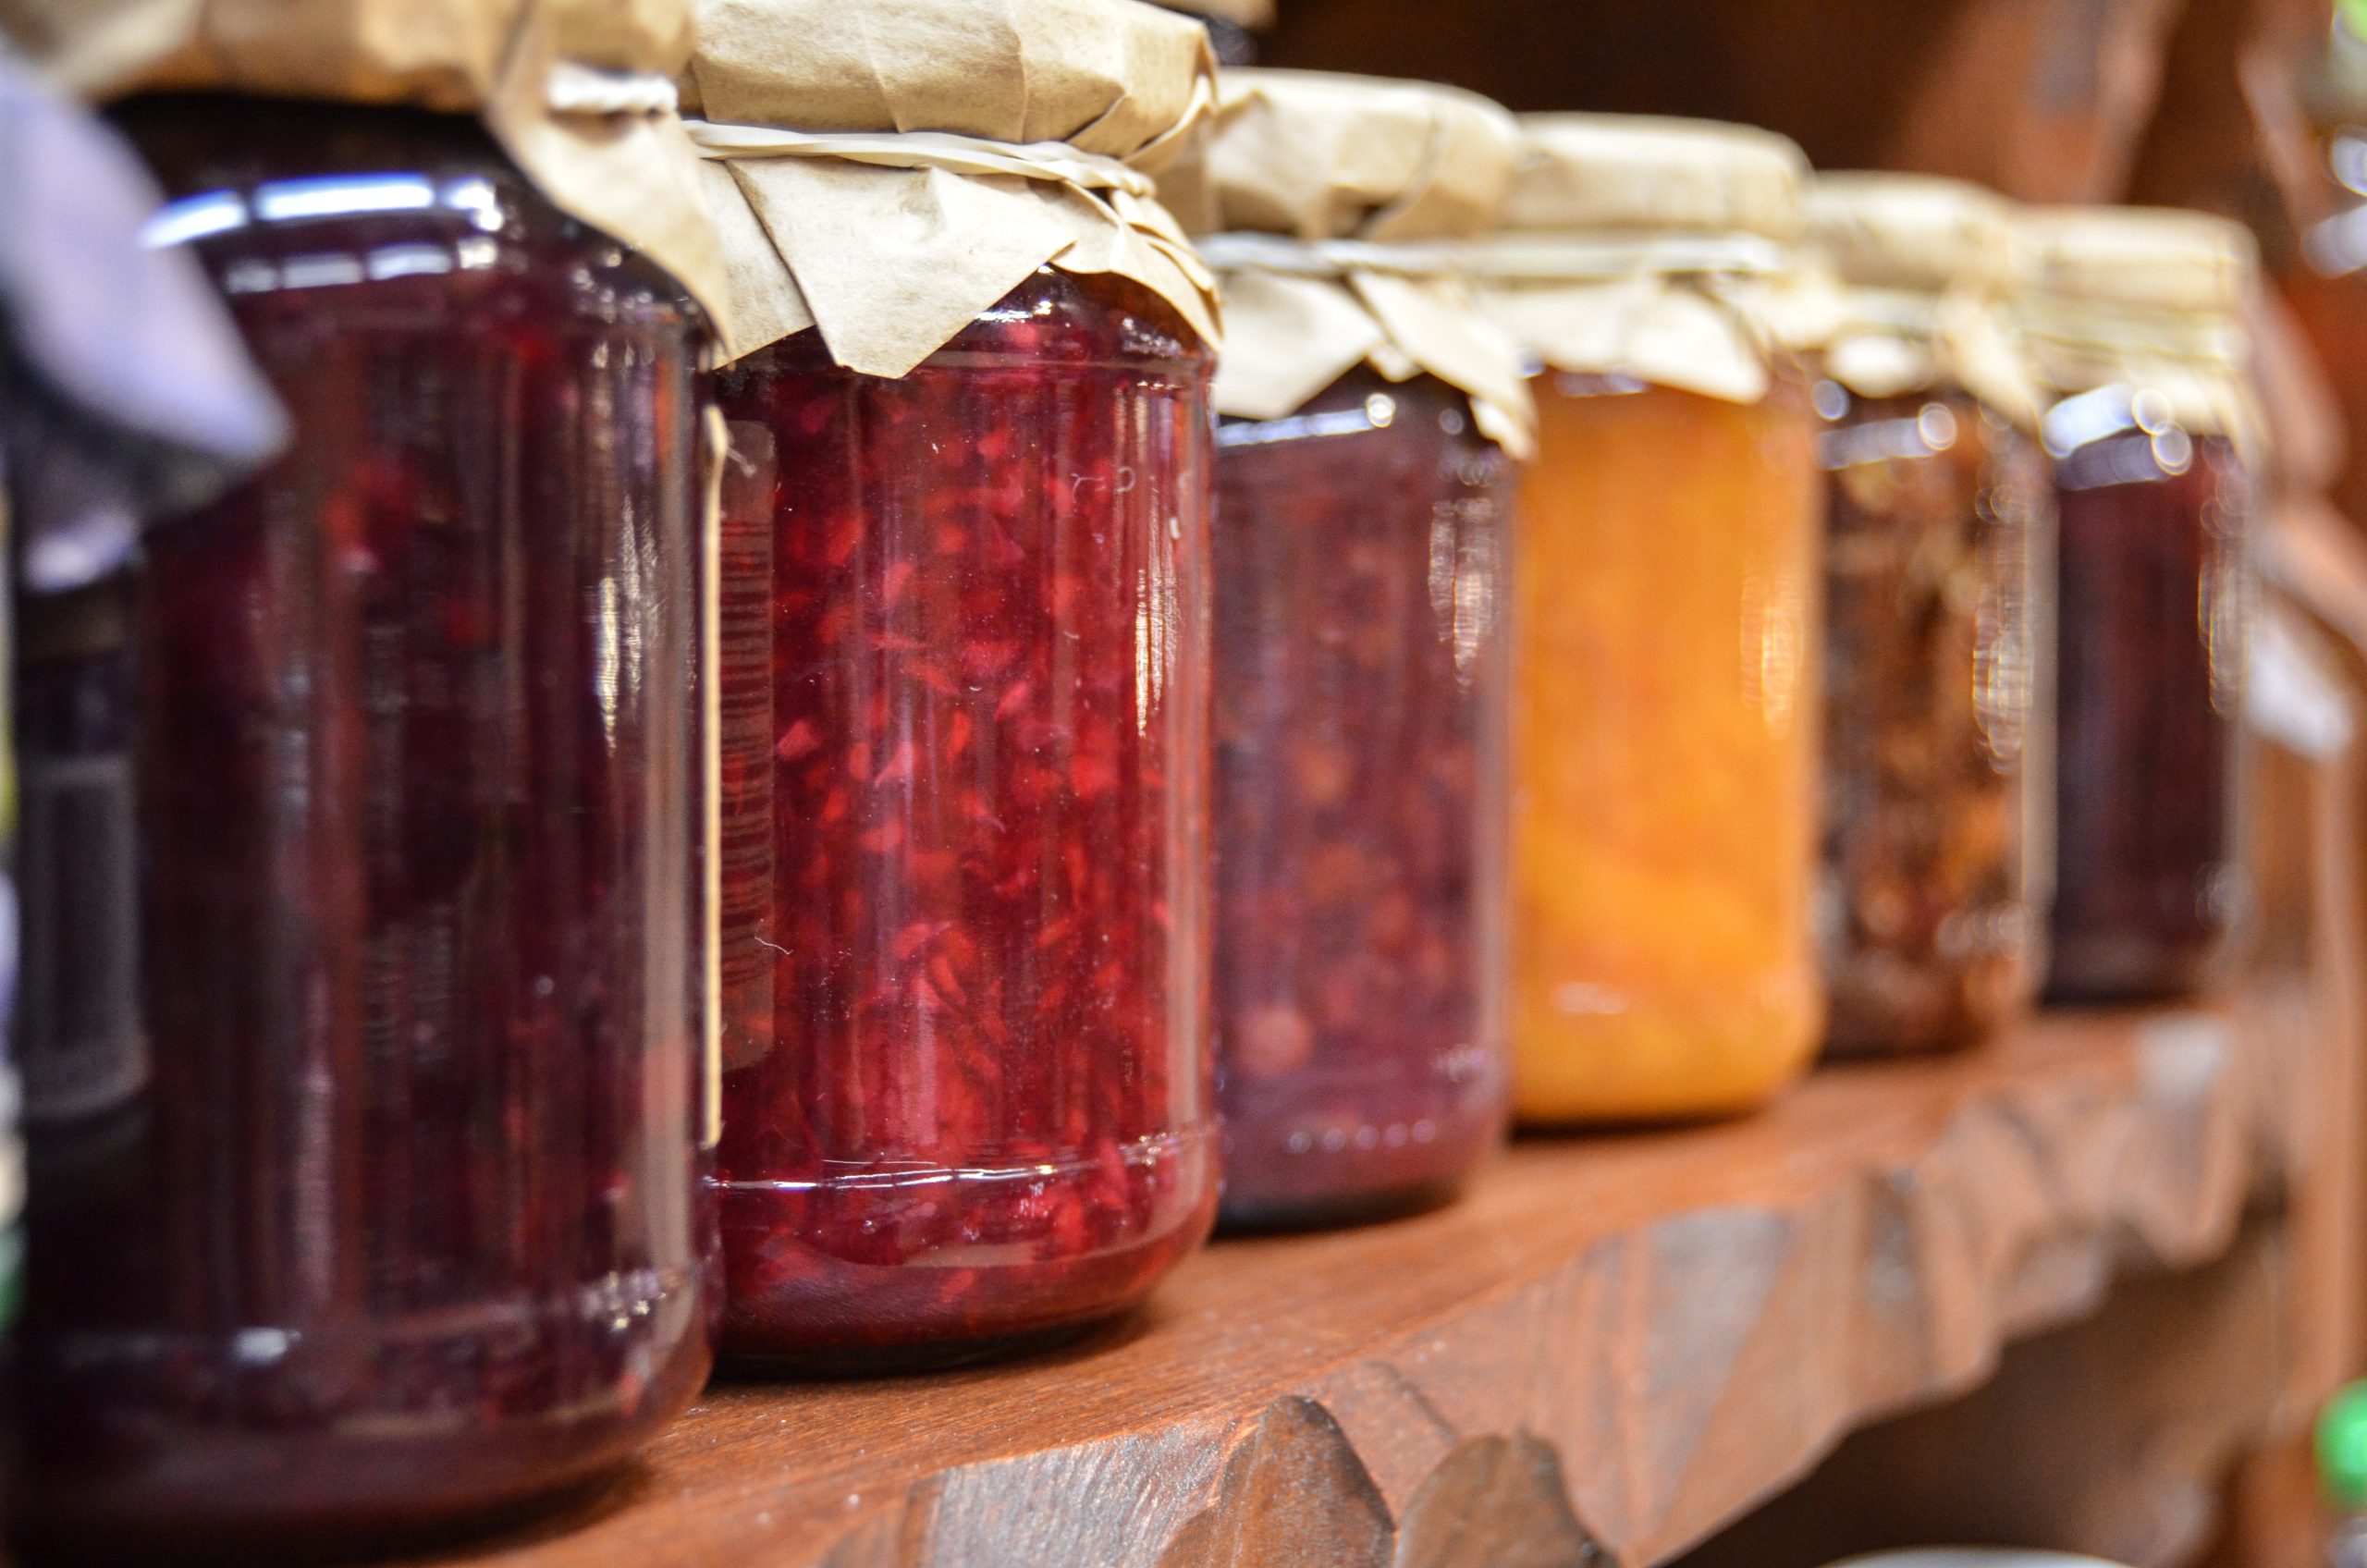 Photo of jars filled with multicolor preserves and jams